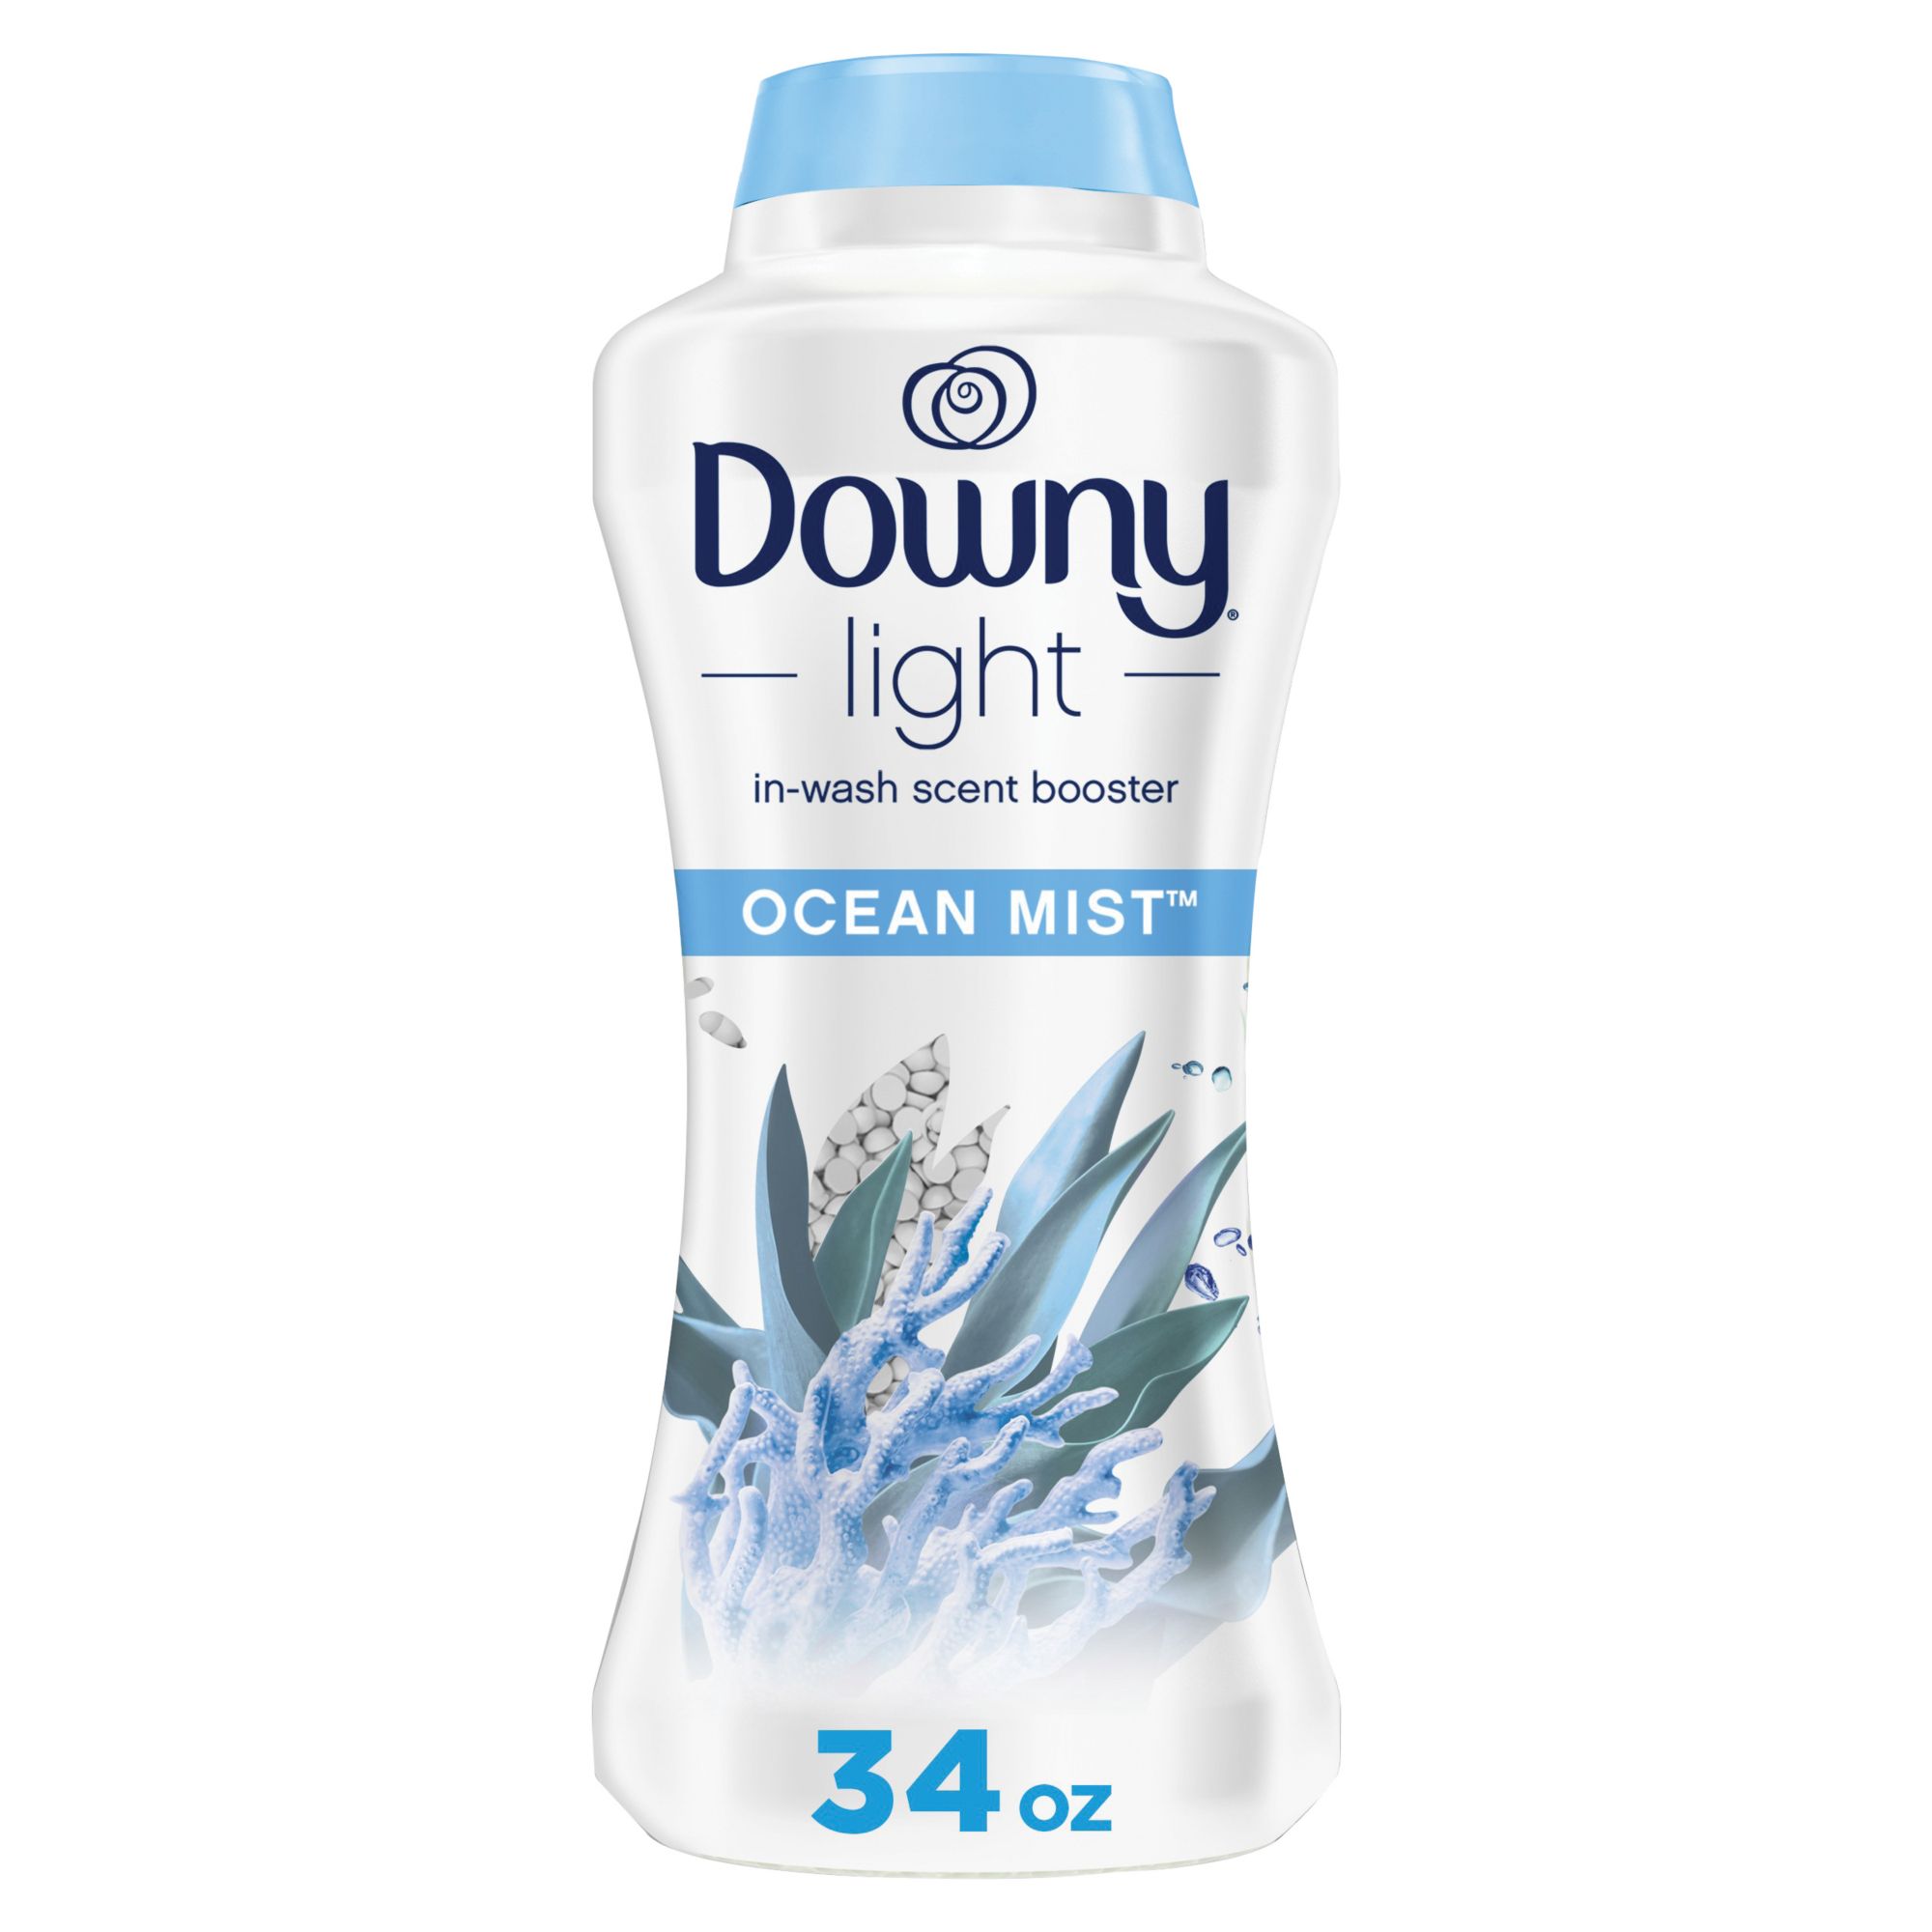 Downy Light Laundry Scent Booster Beads for Washer, 34 oz., Ocean